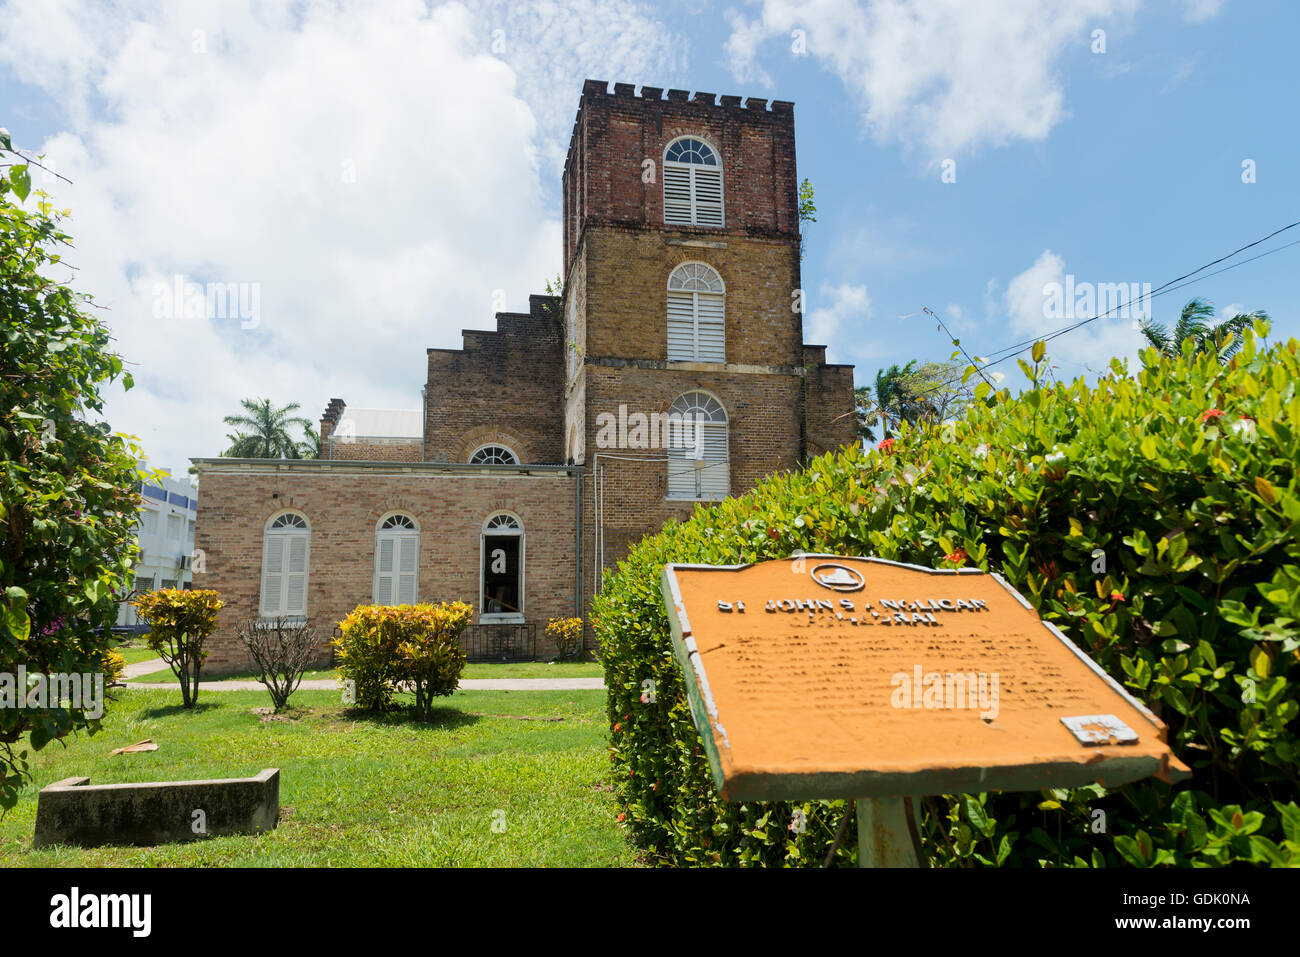 Belize City, Belize - June  24, 2016: Standing by the information panel in front of St John's Anglican Cathedral in Belize City. Stock Photo